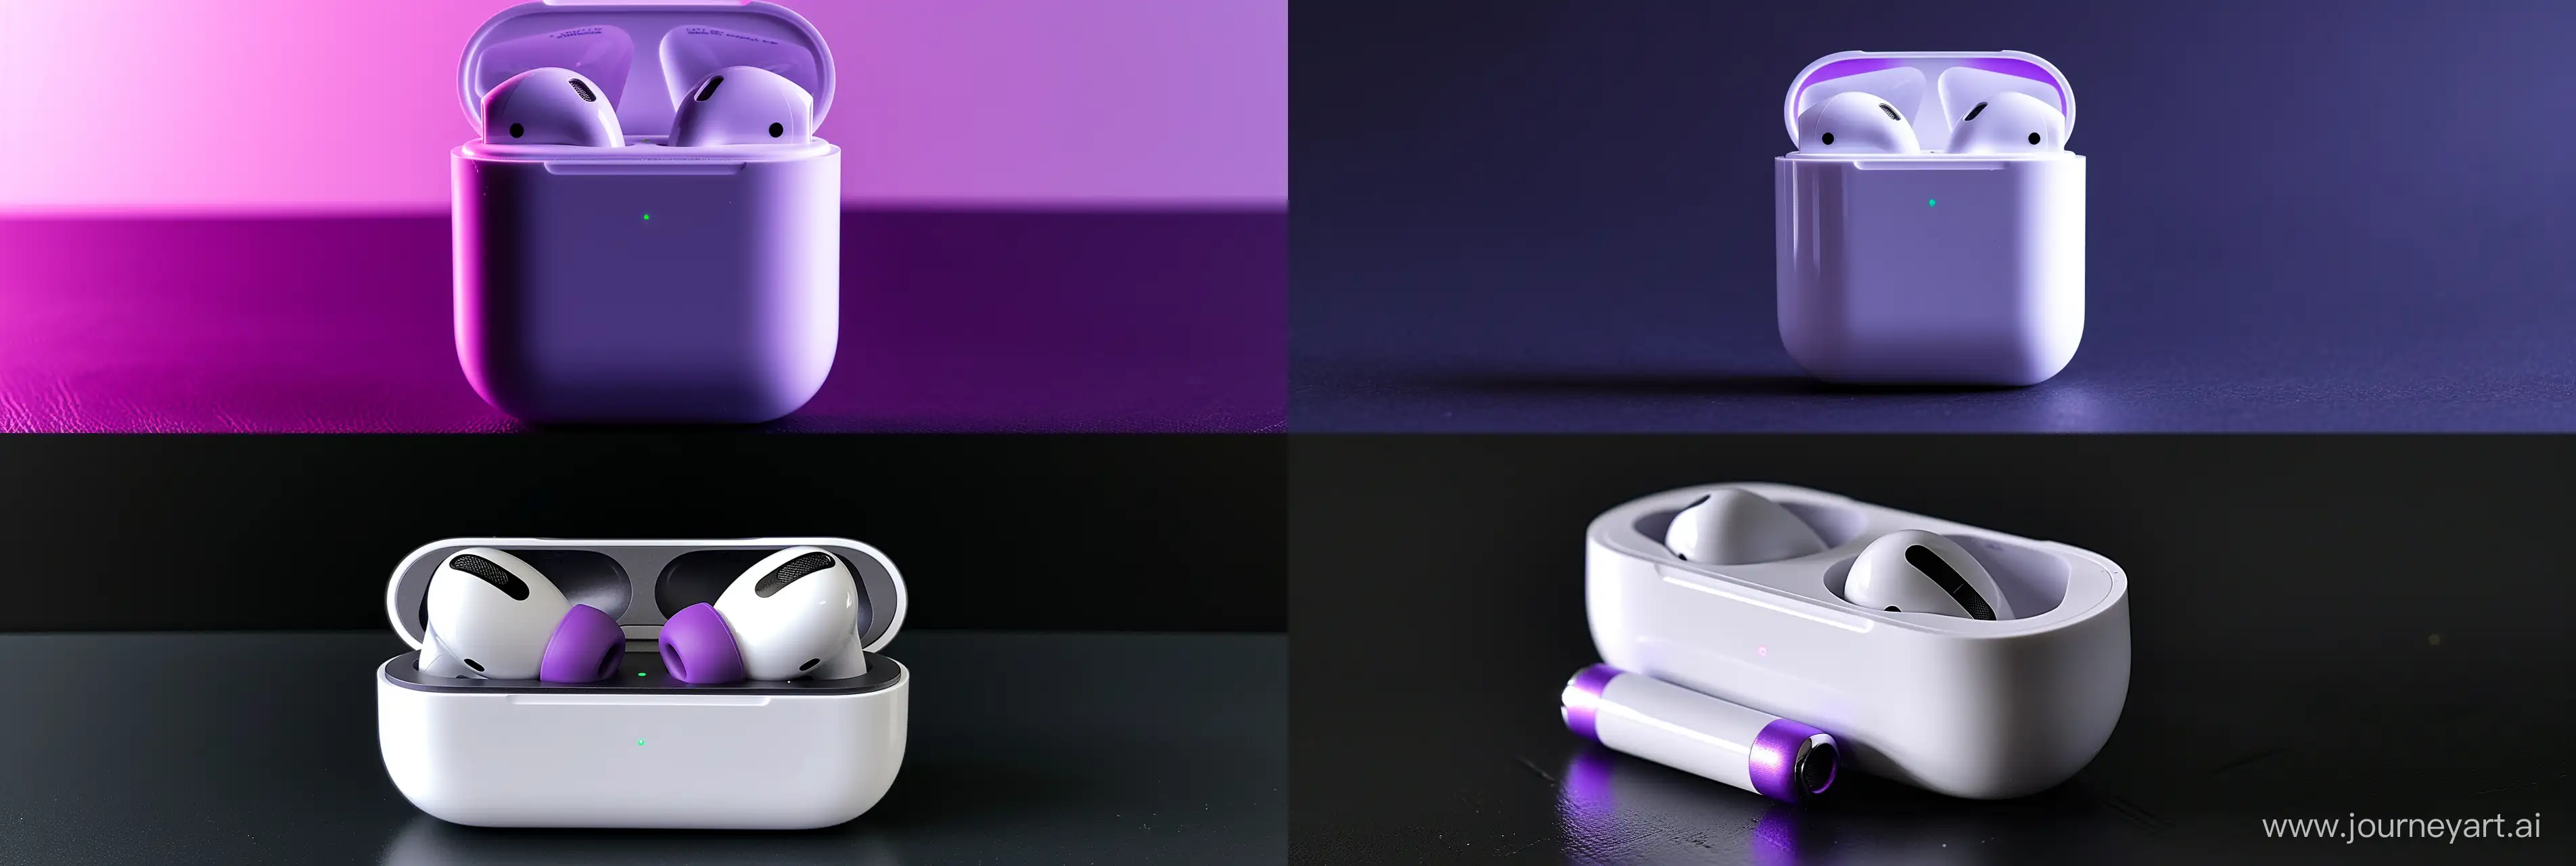  AirPods displayed with dynamic purple accents, sleek and high-tech appearance, targeting a hip and young audience, for use in digital advertising, resolution to fit 900x300 pixels --ar 3:1